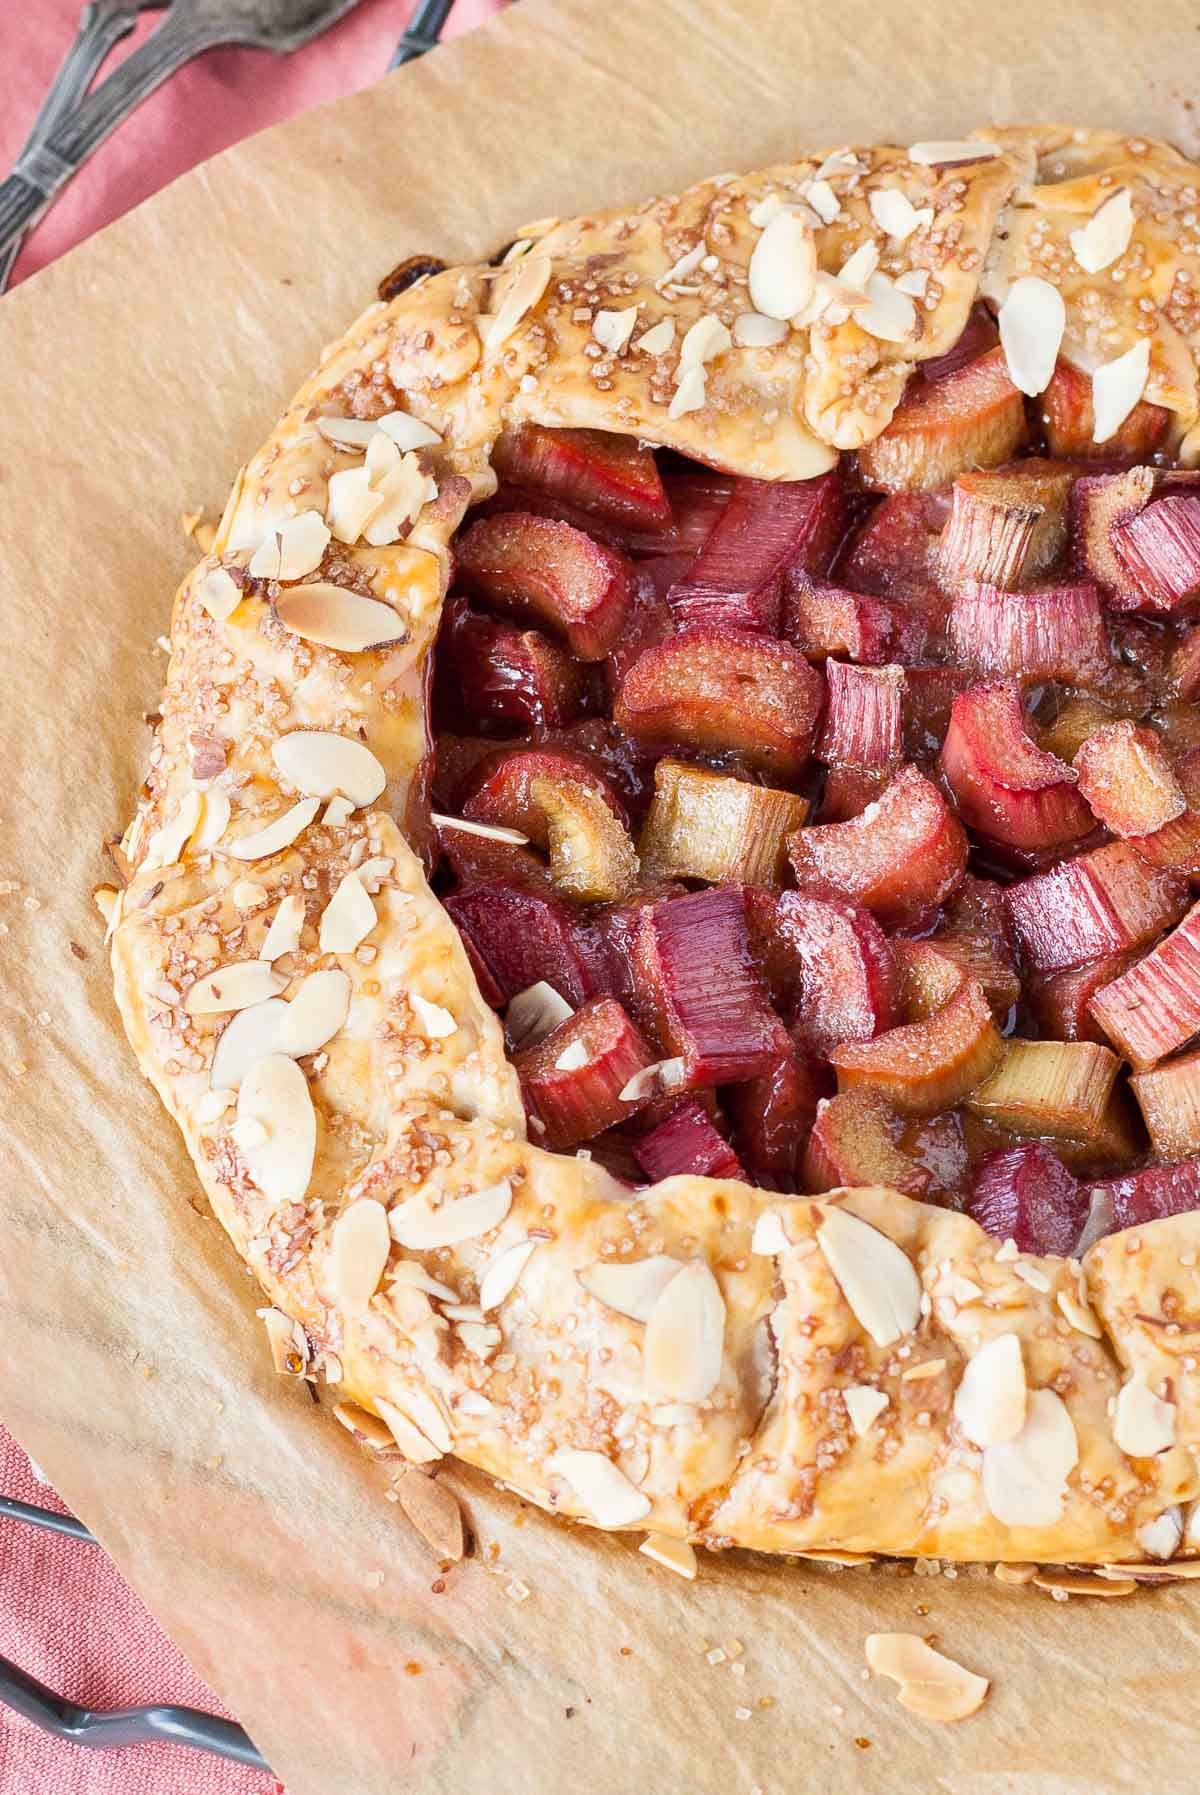 Close up of the rhubarb in the galette.